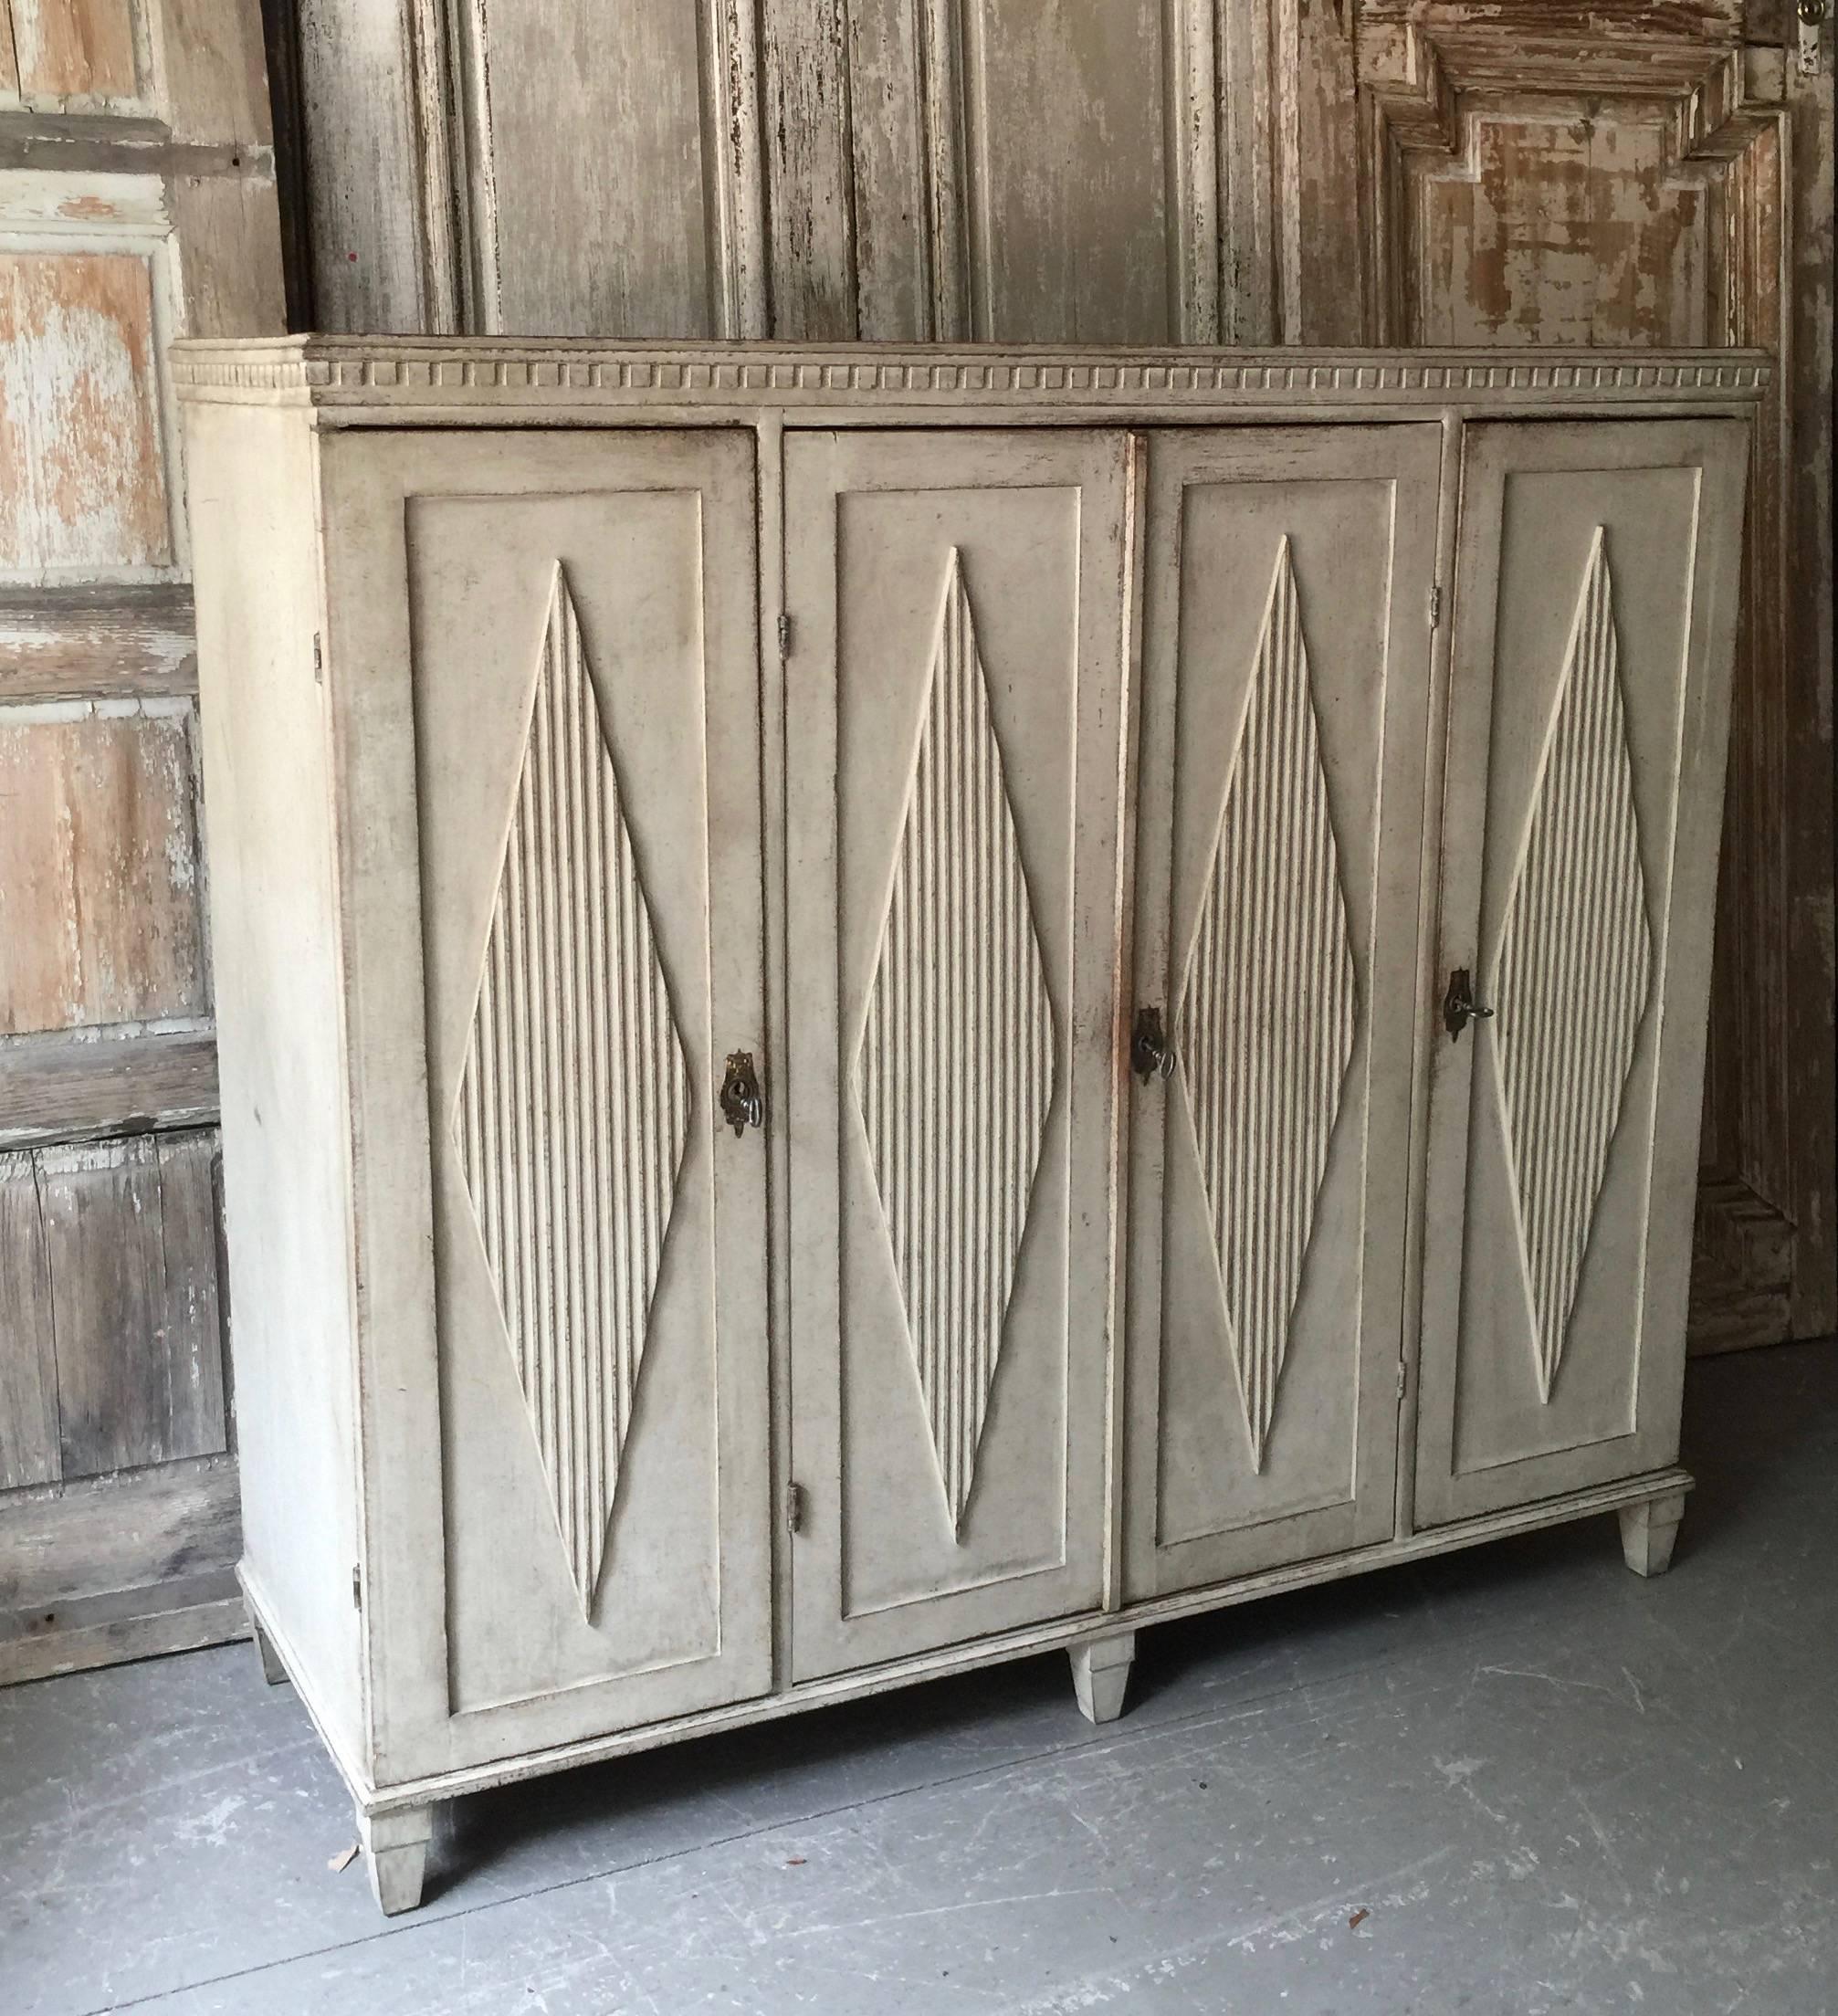 Large 19th century Swedish Gustavian sideboard in classic Gustavian style including four-panelled doors with diamond shaped lozenges. Inside five drawers for extra storages. Wonderful find,
circa 1860, Sweden.
Here are few examples surprising